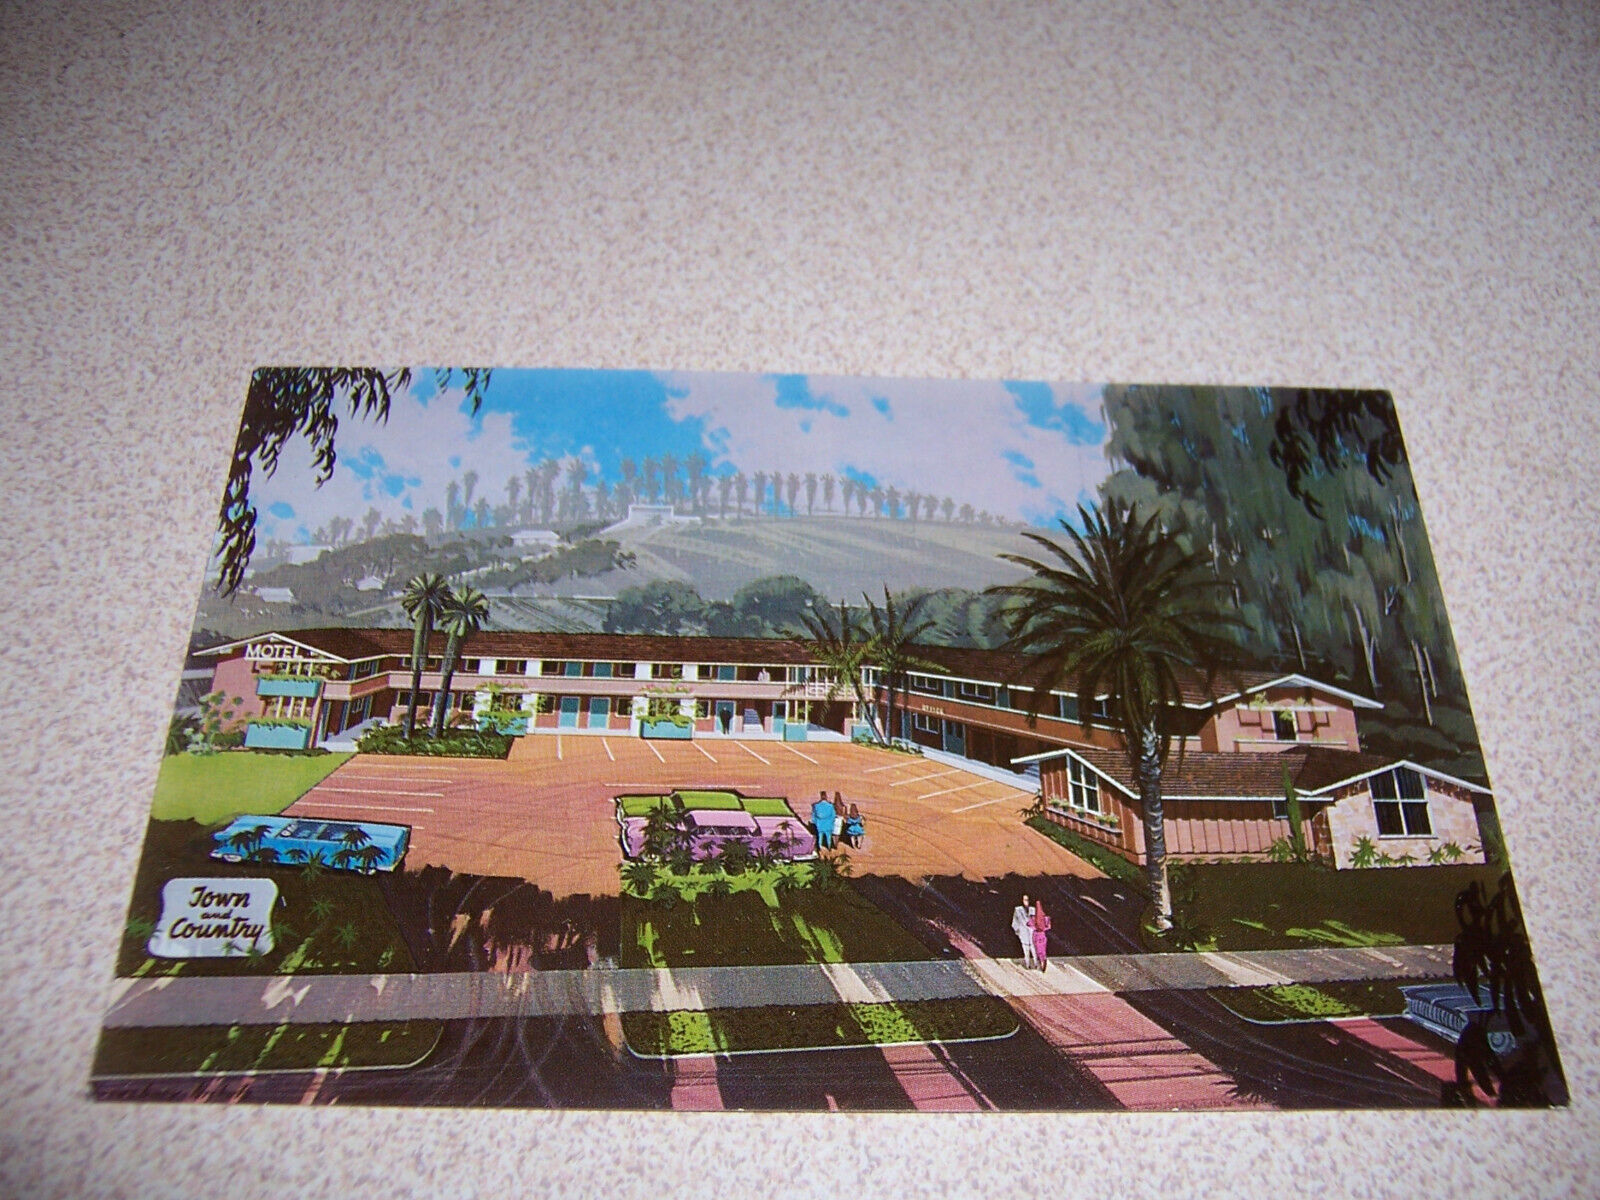 1950s TOWN & COUNTRY MOTEL, HOLLYWOOD CA. VTG ART POSTCARD